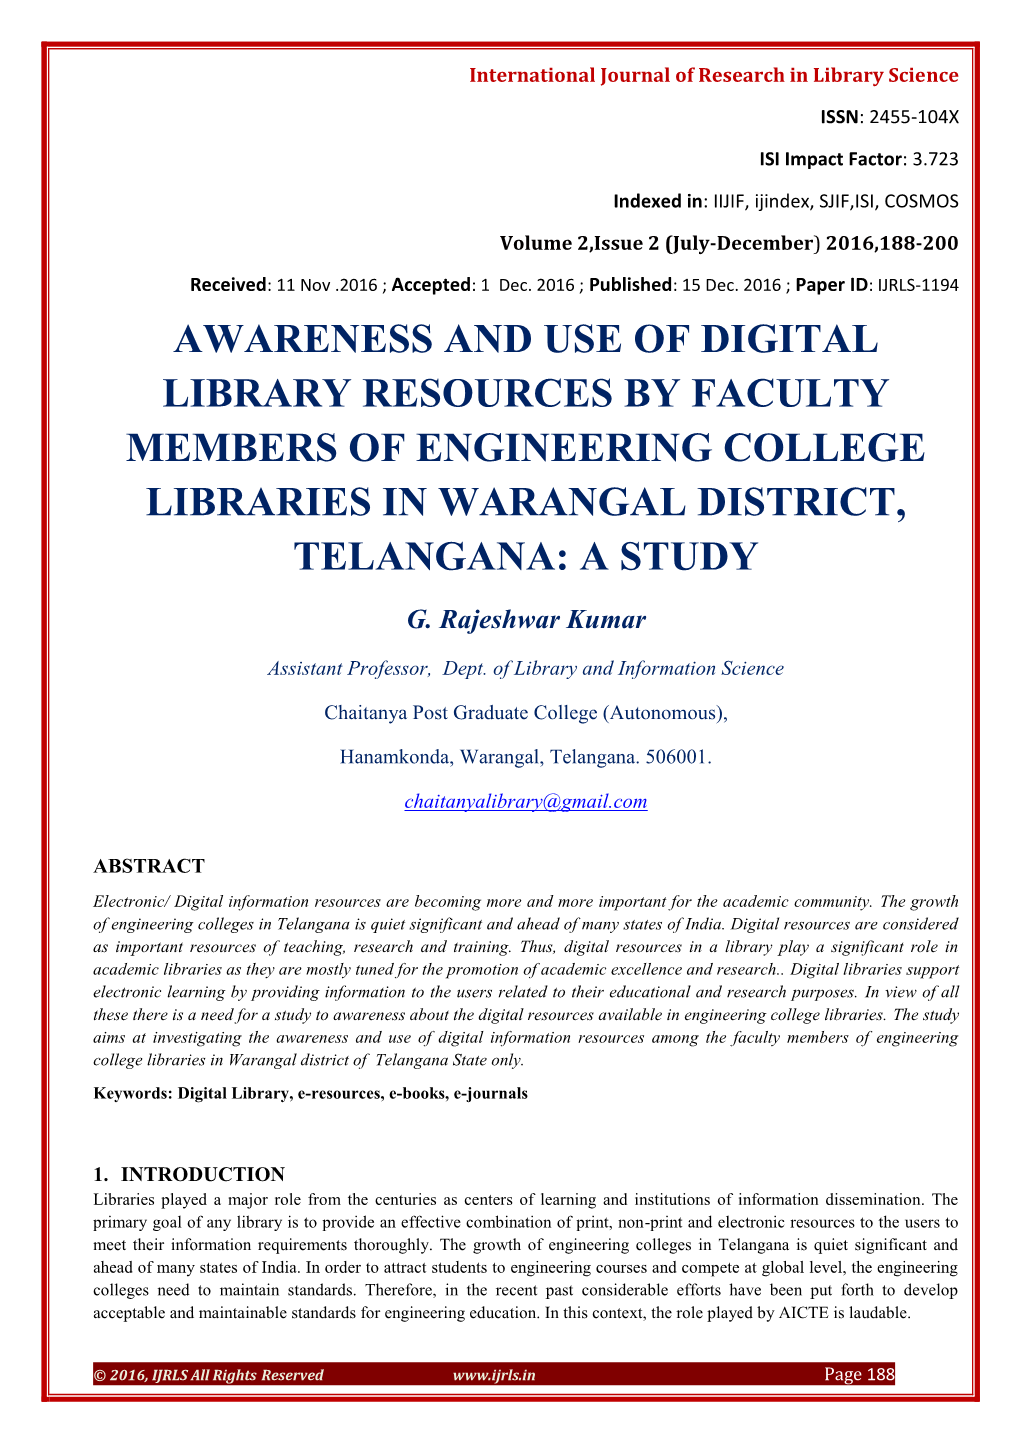 Awareness and Use of Digital Library Resources by Faculty Members of Engineering College Libraries in Warangal District, Telangana: a Study